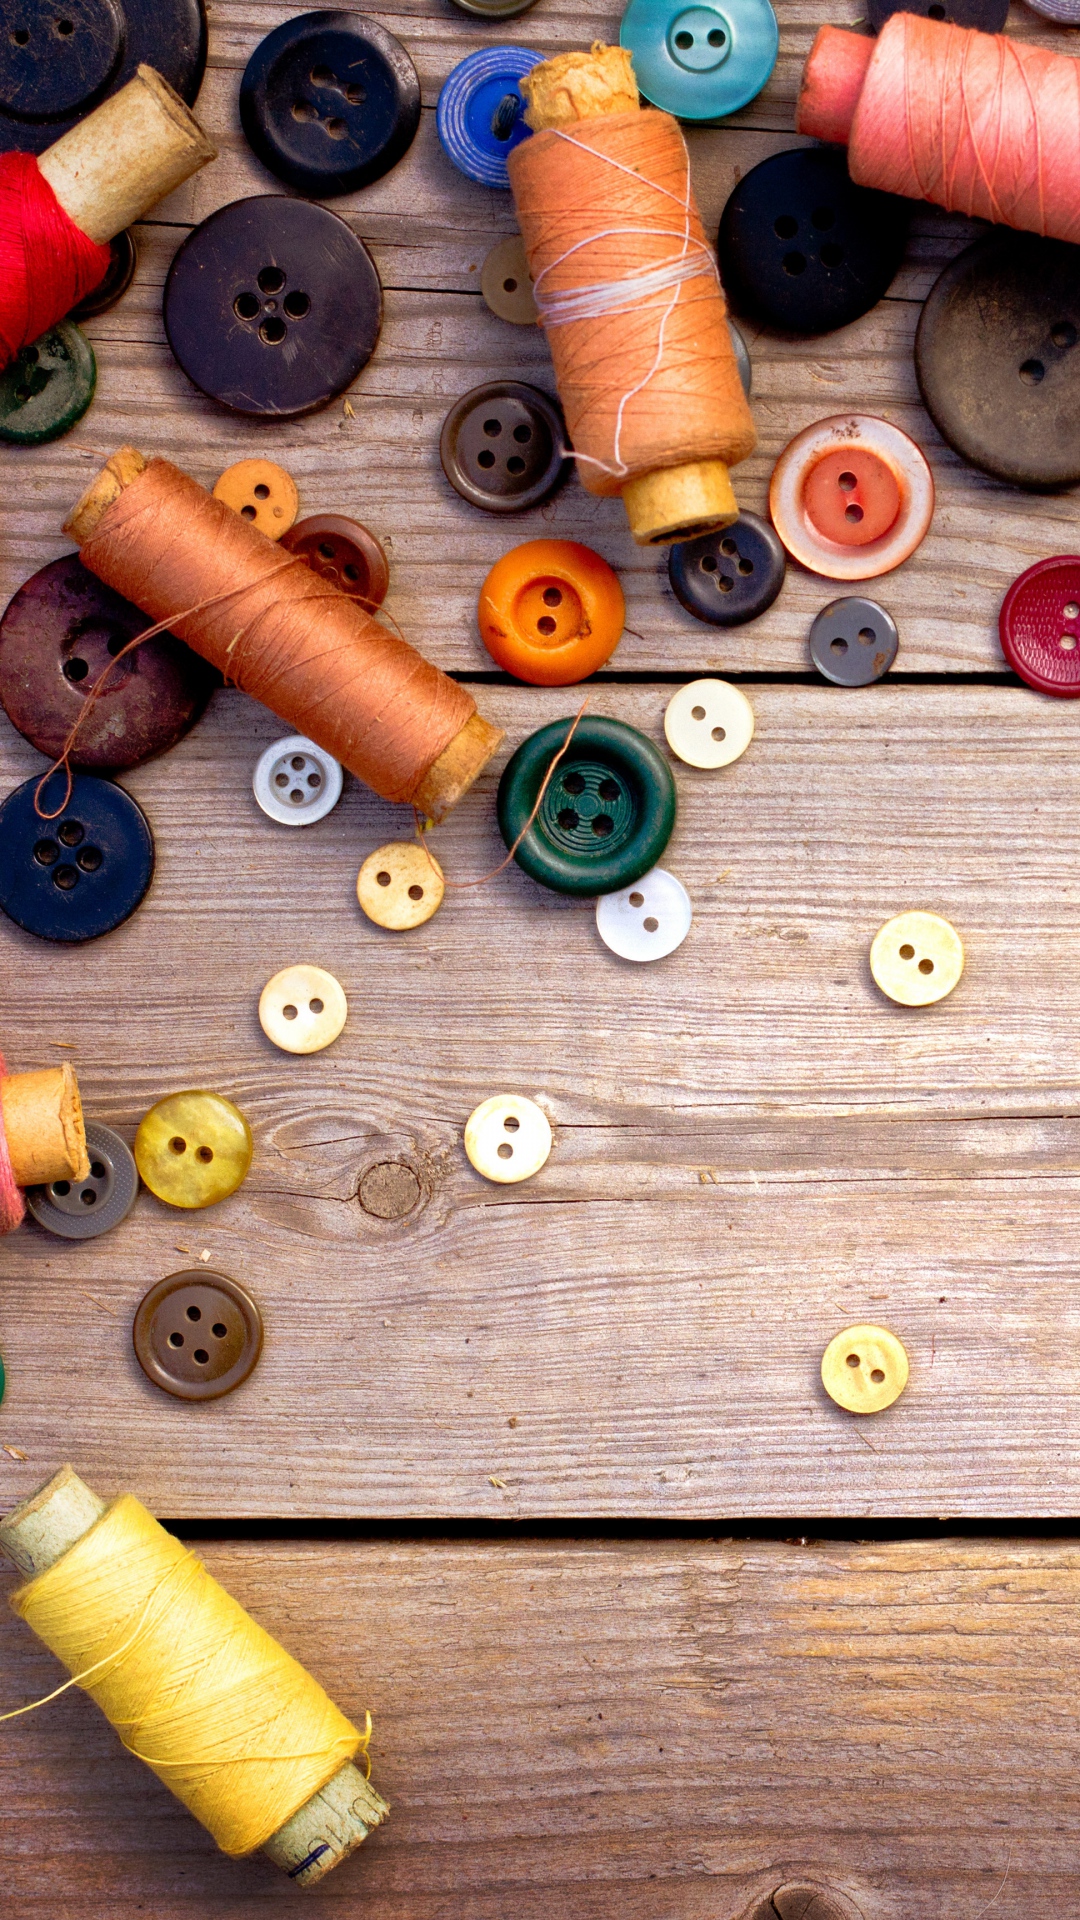 Wallpaper Thread Ussr Buttons Sewing Wood Background